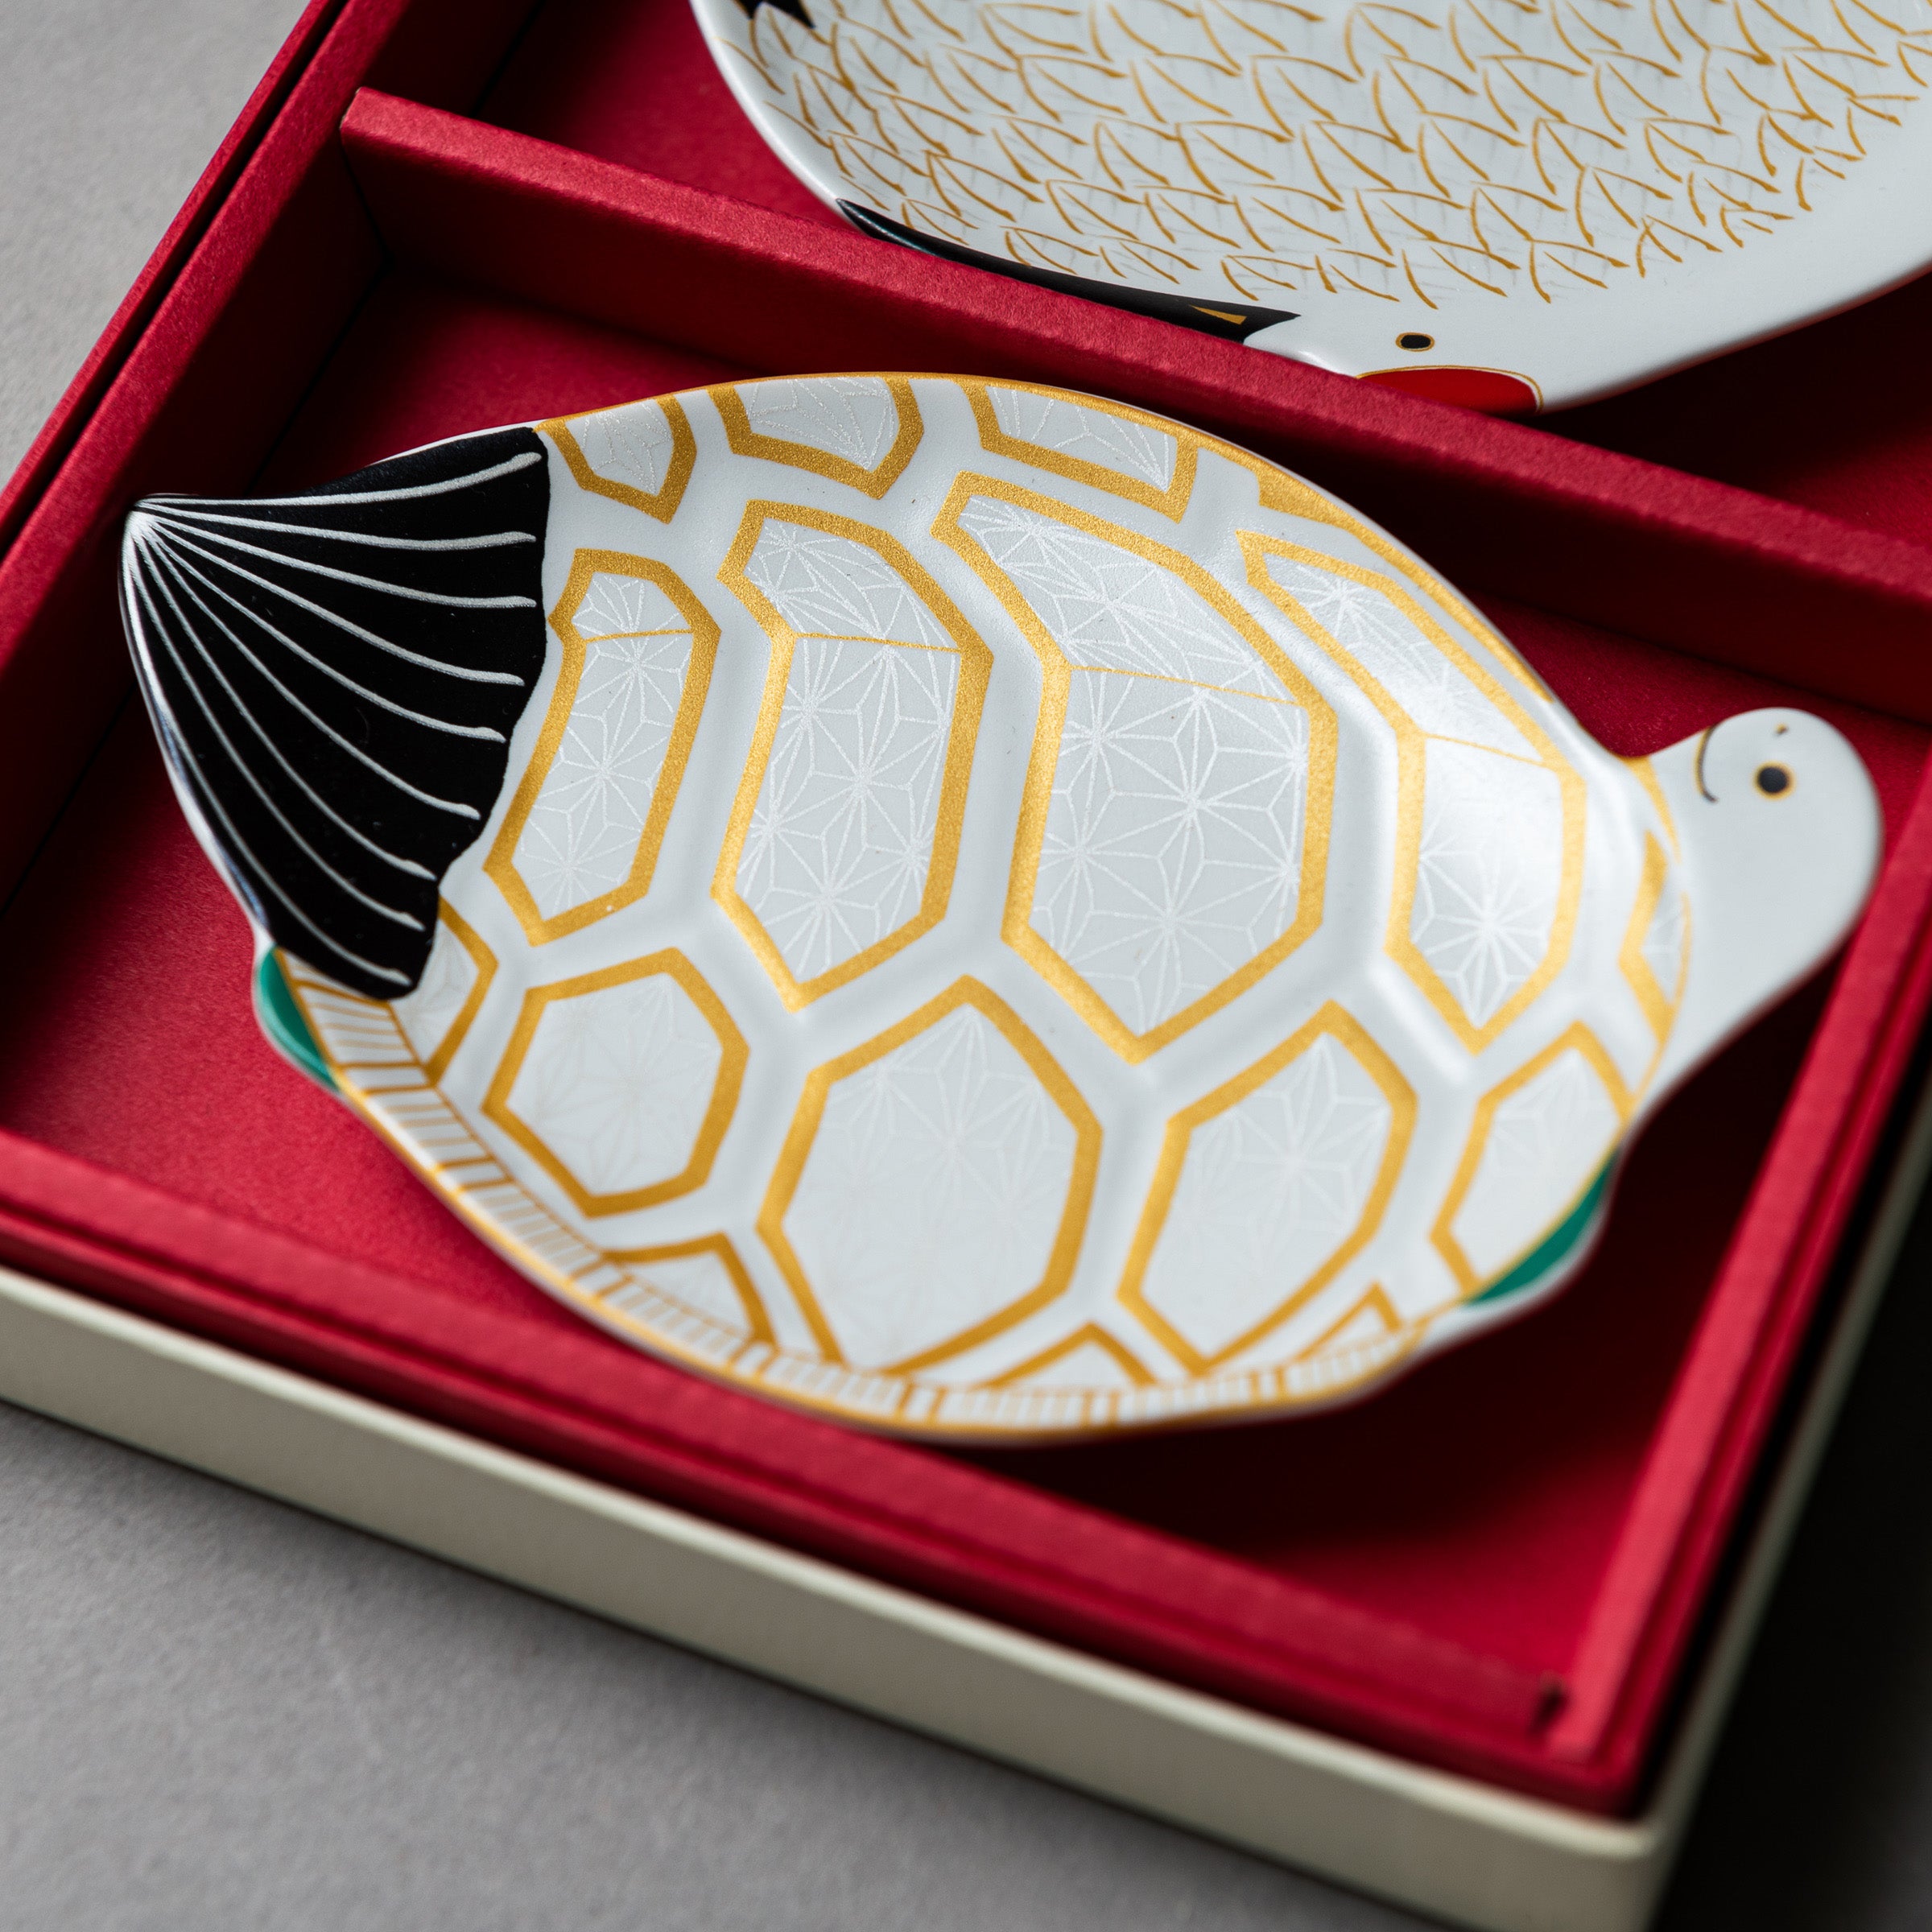 Arita Ware Crane and Tortoise Plate Gift Pack -13.5cm -Set of 2 / 有田焼-幸楽窯 鶴亀 銘々皿 ギフトセット